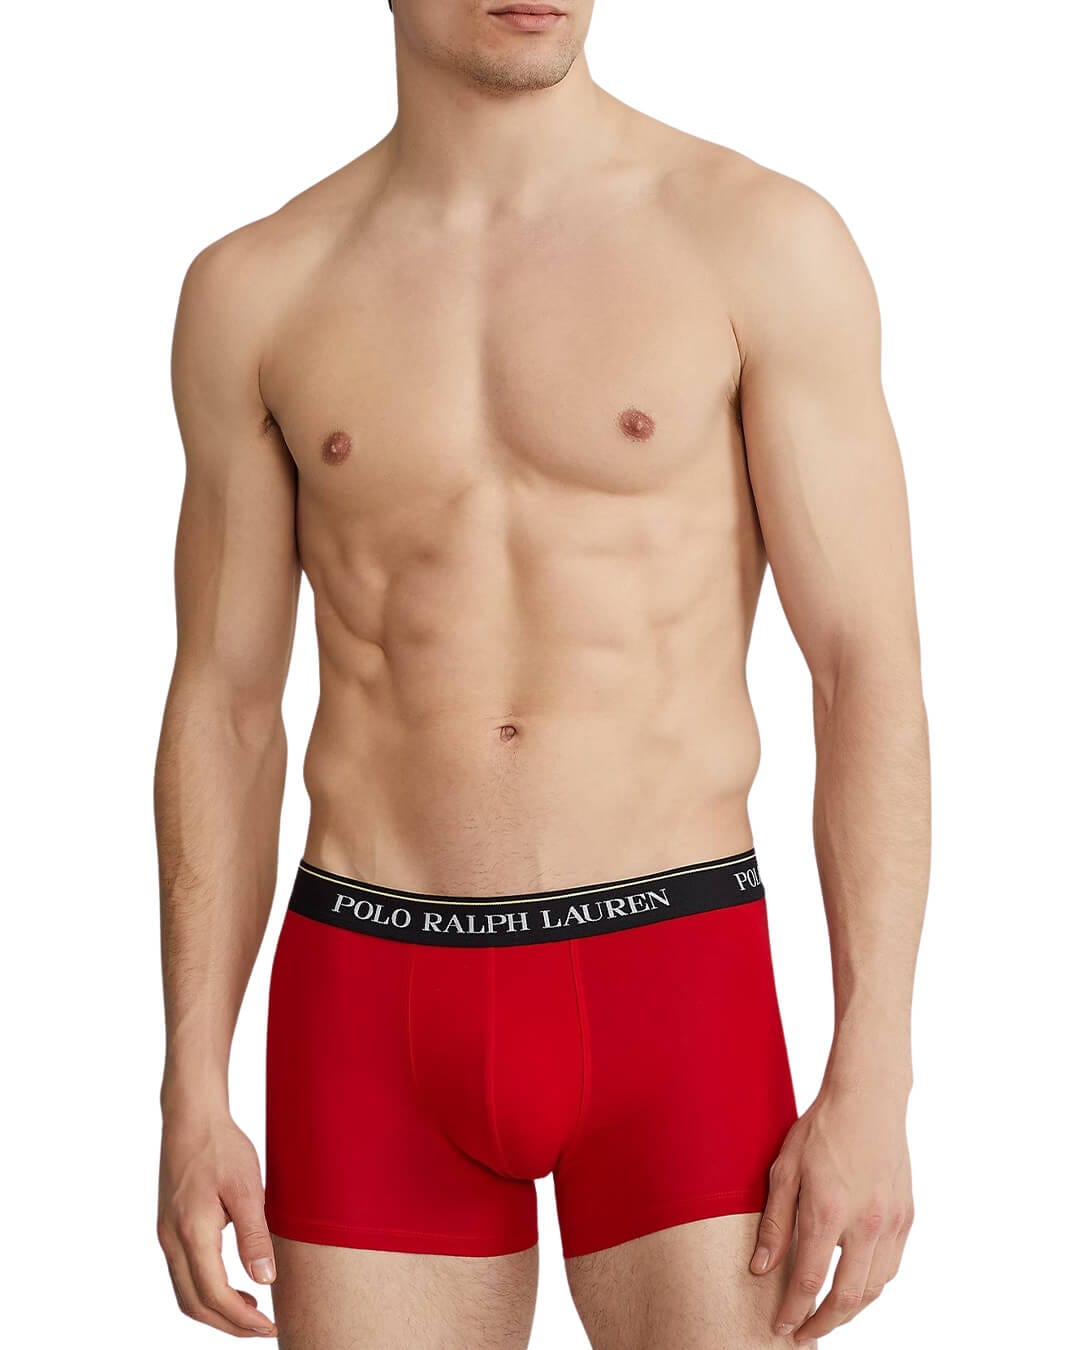 Polo Ralph Lauren Underwear Polo Ralph Lauren Black, Red And Turquoise Three-Pack Trunks